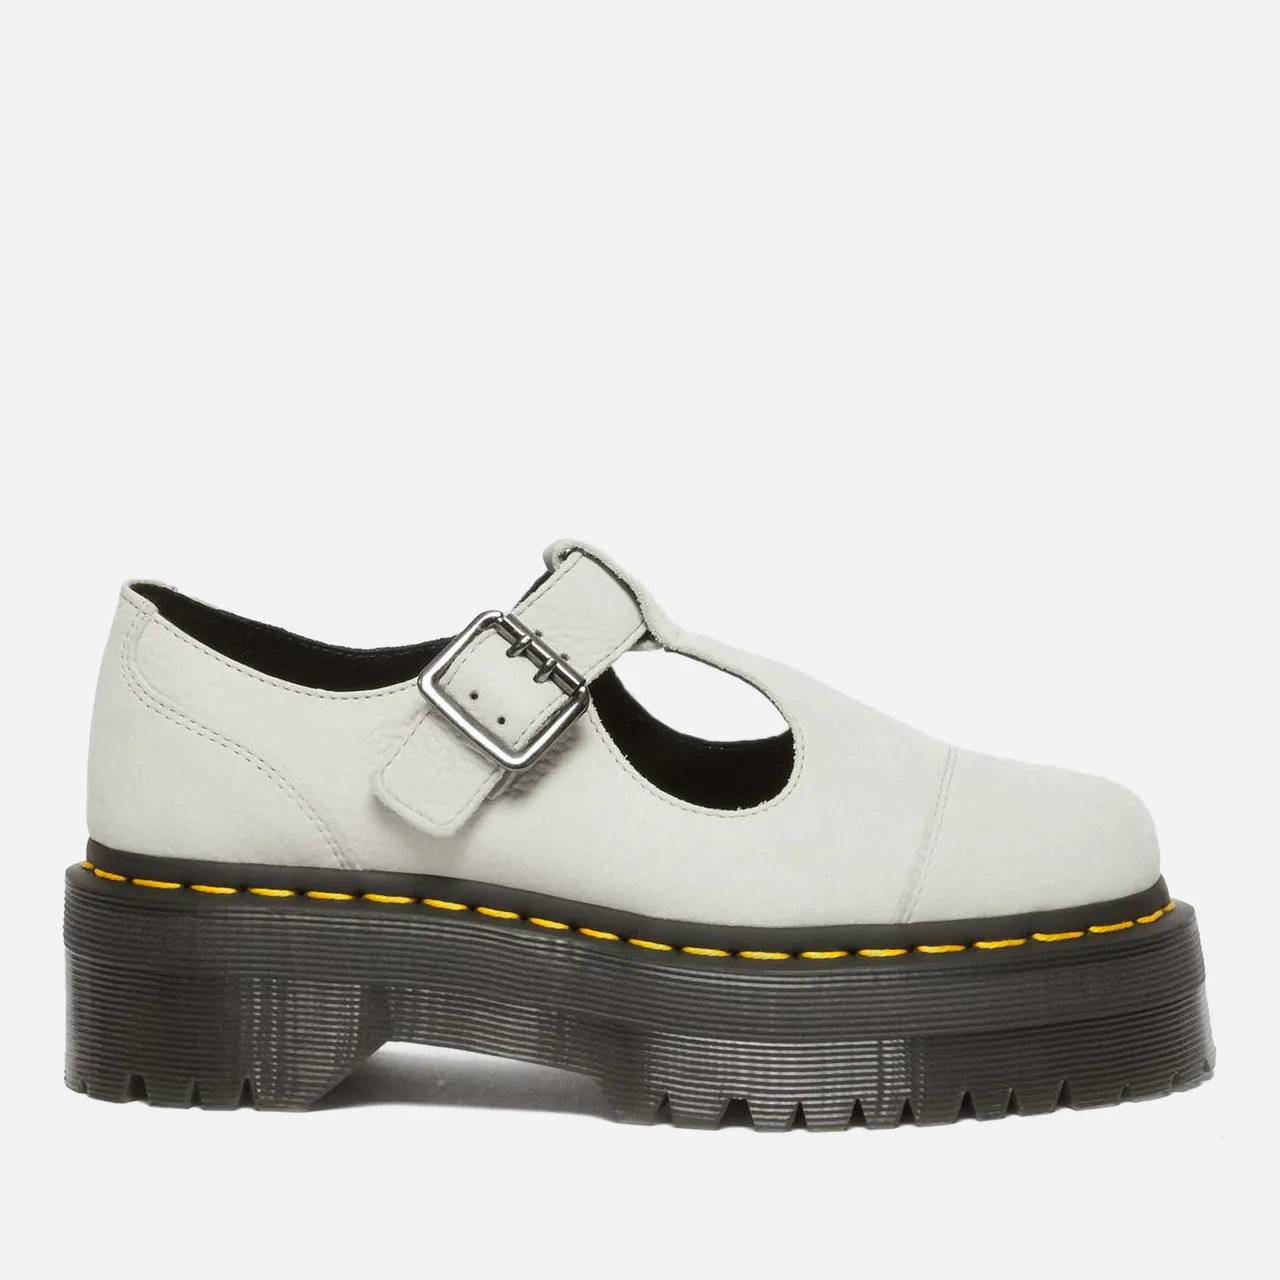 Dr. Martens Women's Bethan Leather Mary-Jane Shoes - UK